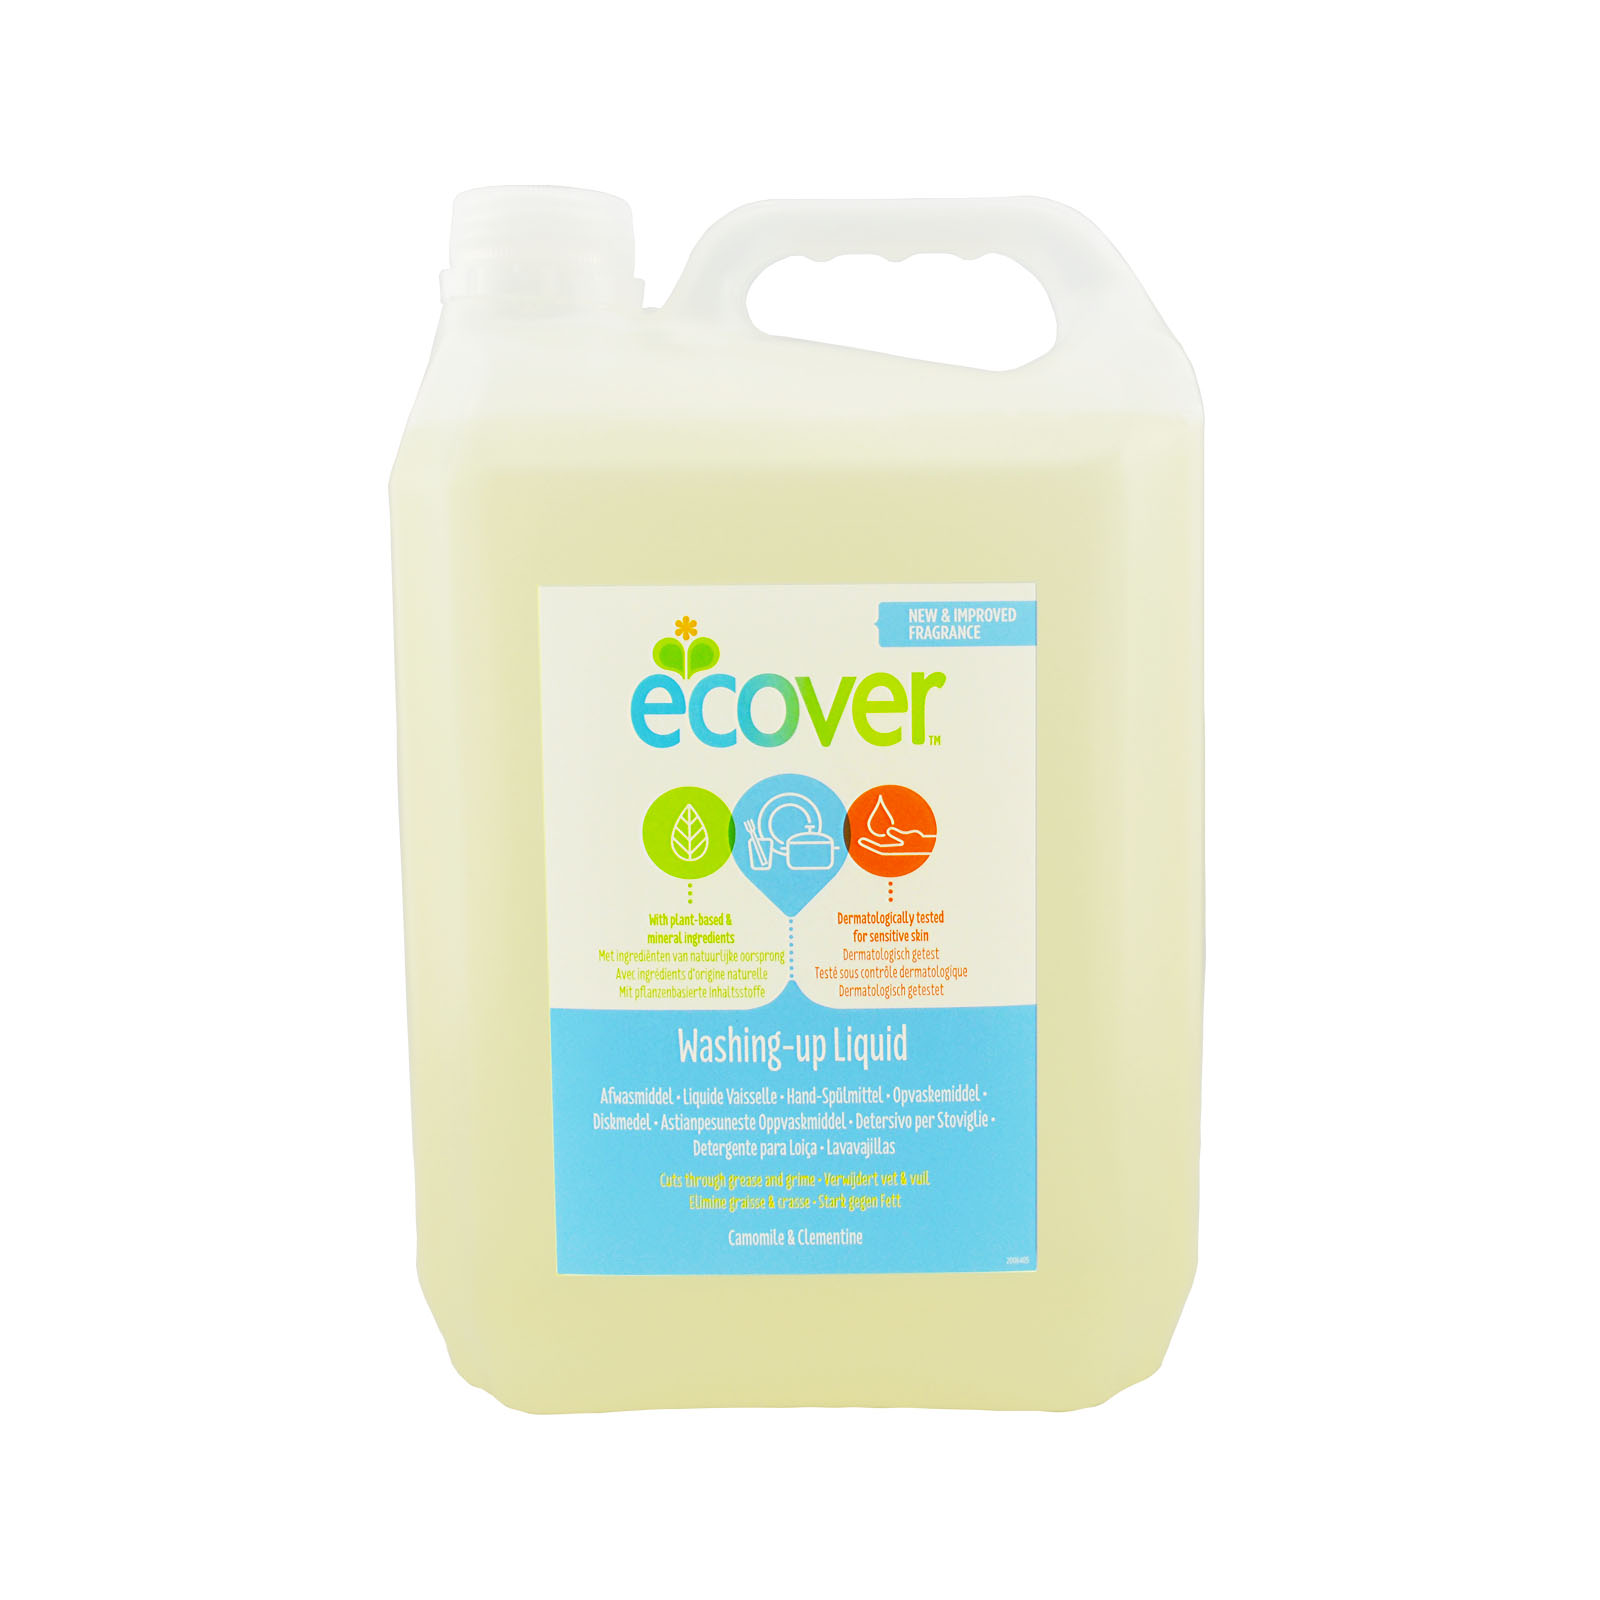 baby-fair Ecover Washing-up Liquid Refill - Camomile & Clementine (5L)